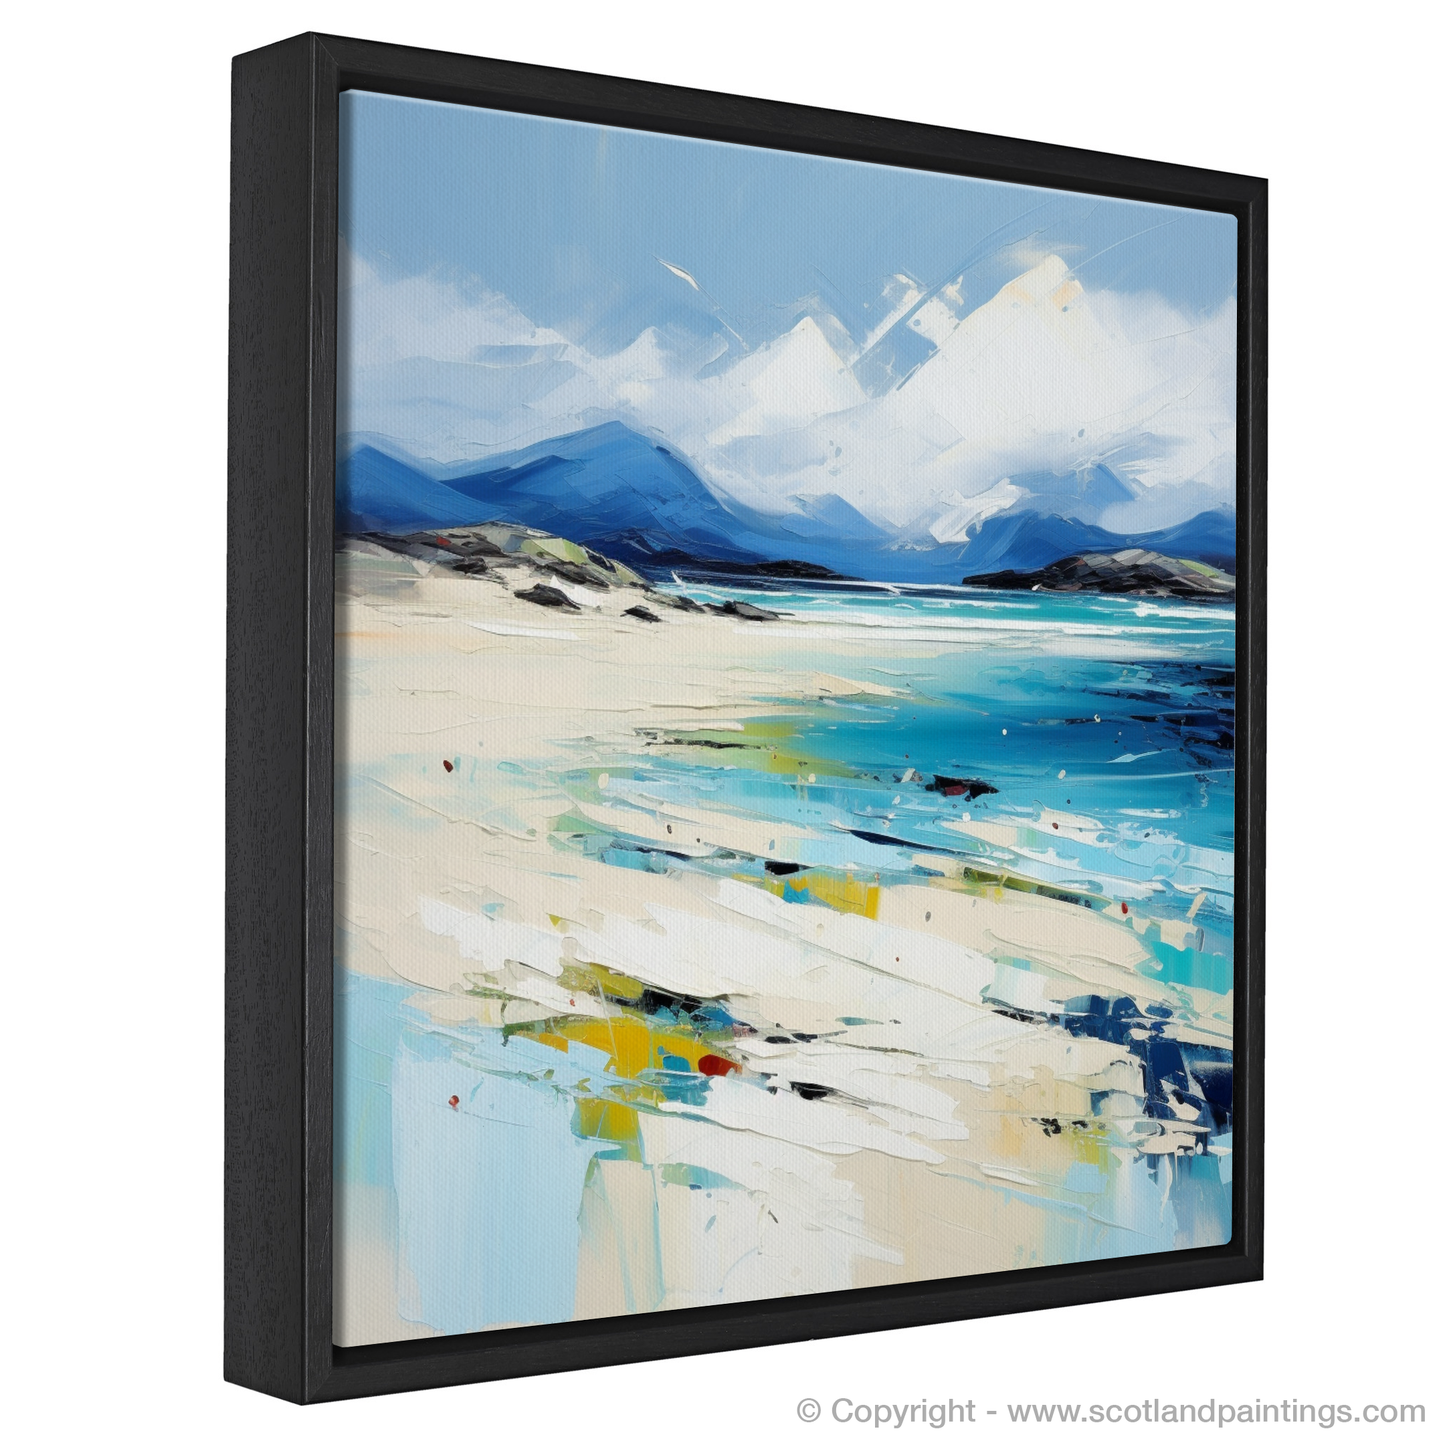 Painting and Art Print of Luskentyre Beach, Isle of Harris entitled "Luskentyre Beach Reverie: An Expressionist Homage to the Hebridean Coast".